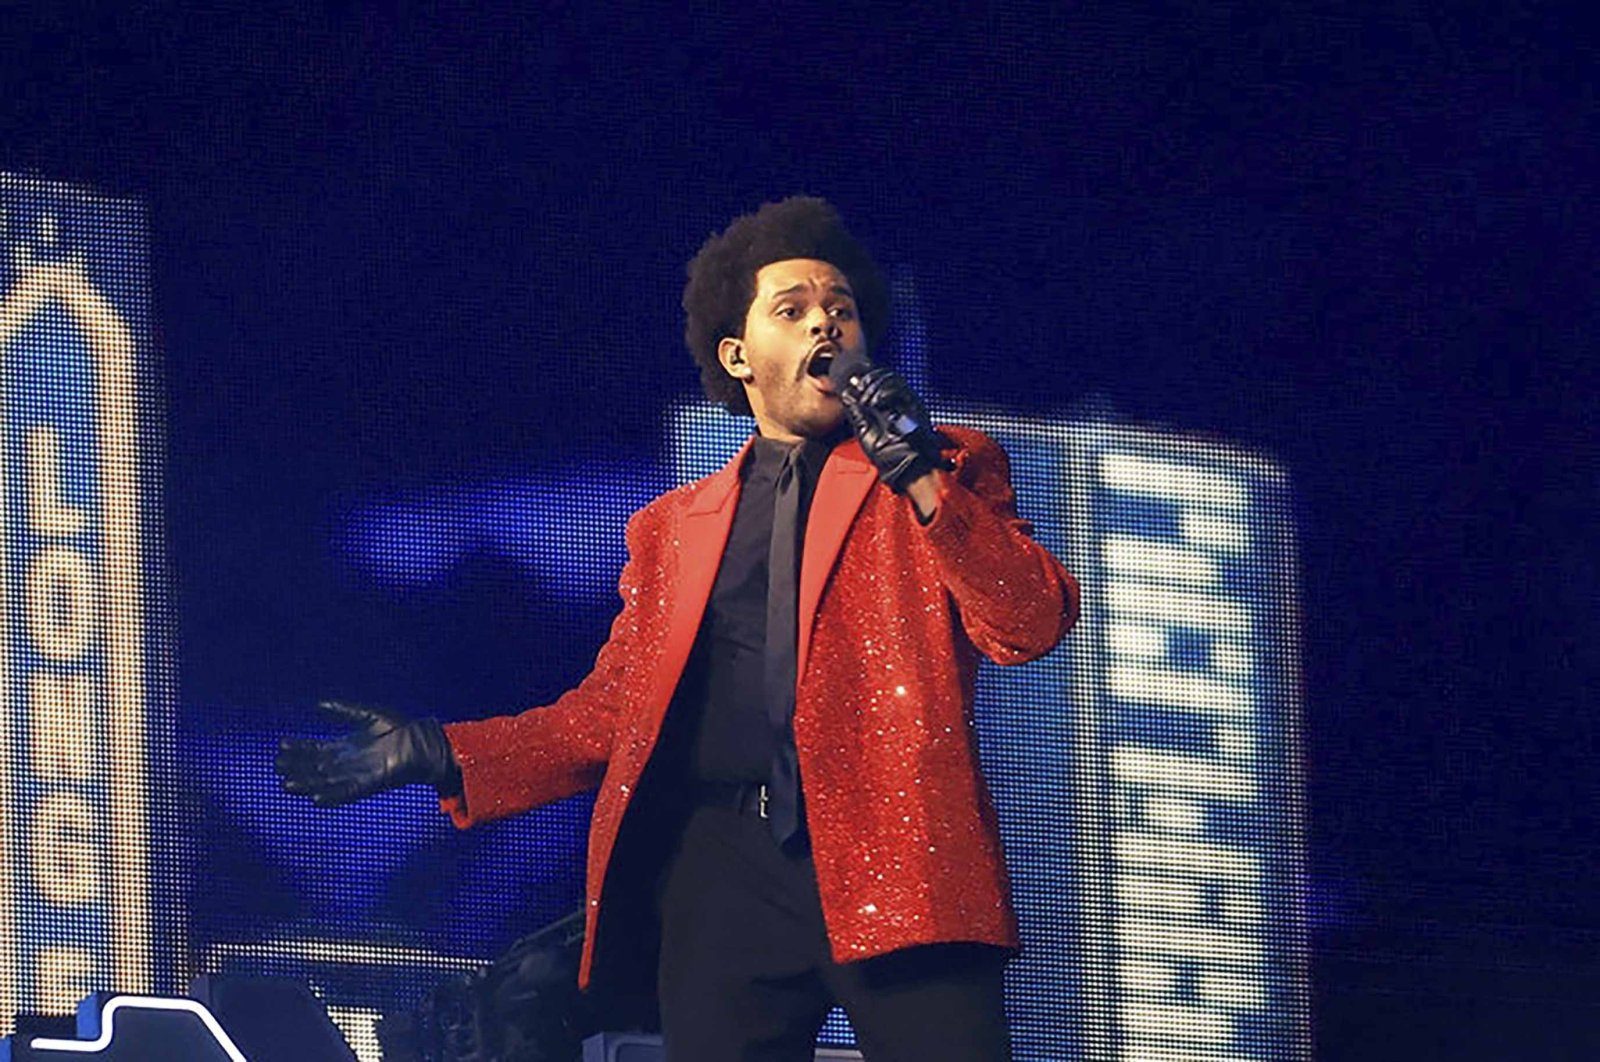 The Weeknd performs in the halftime show during the Super Bowl LV in Tampa, Florida, U.S., Feb. 7, 2021. (Archive Photo)